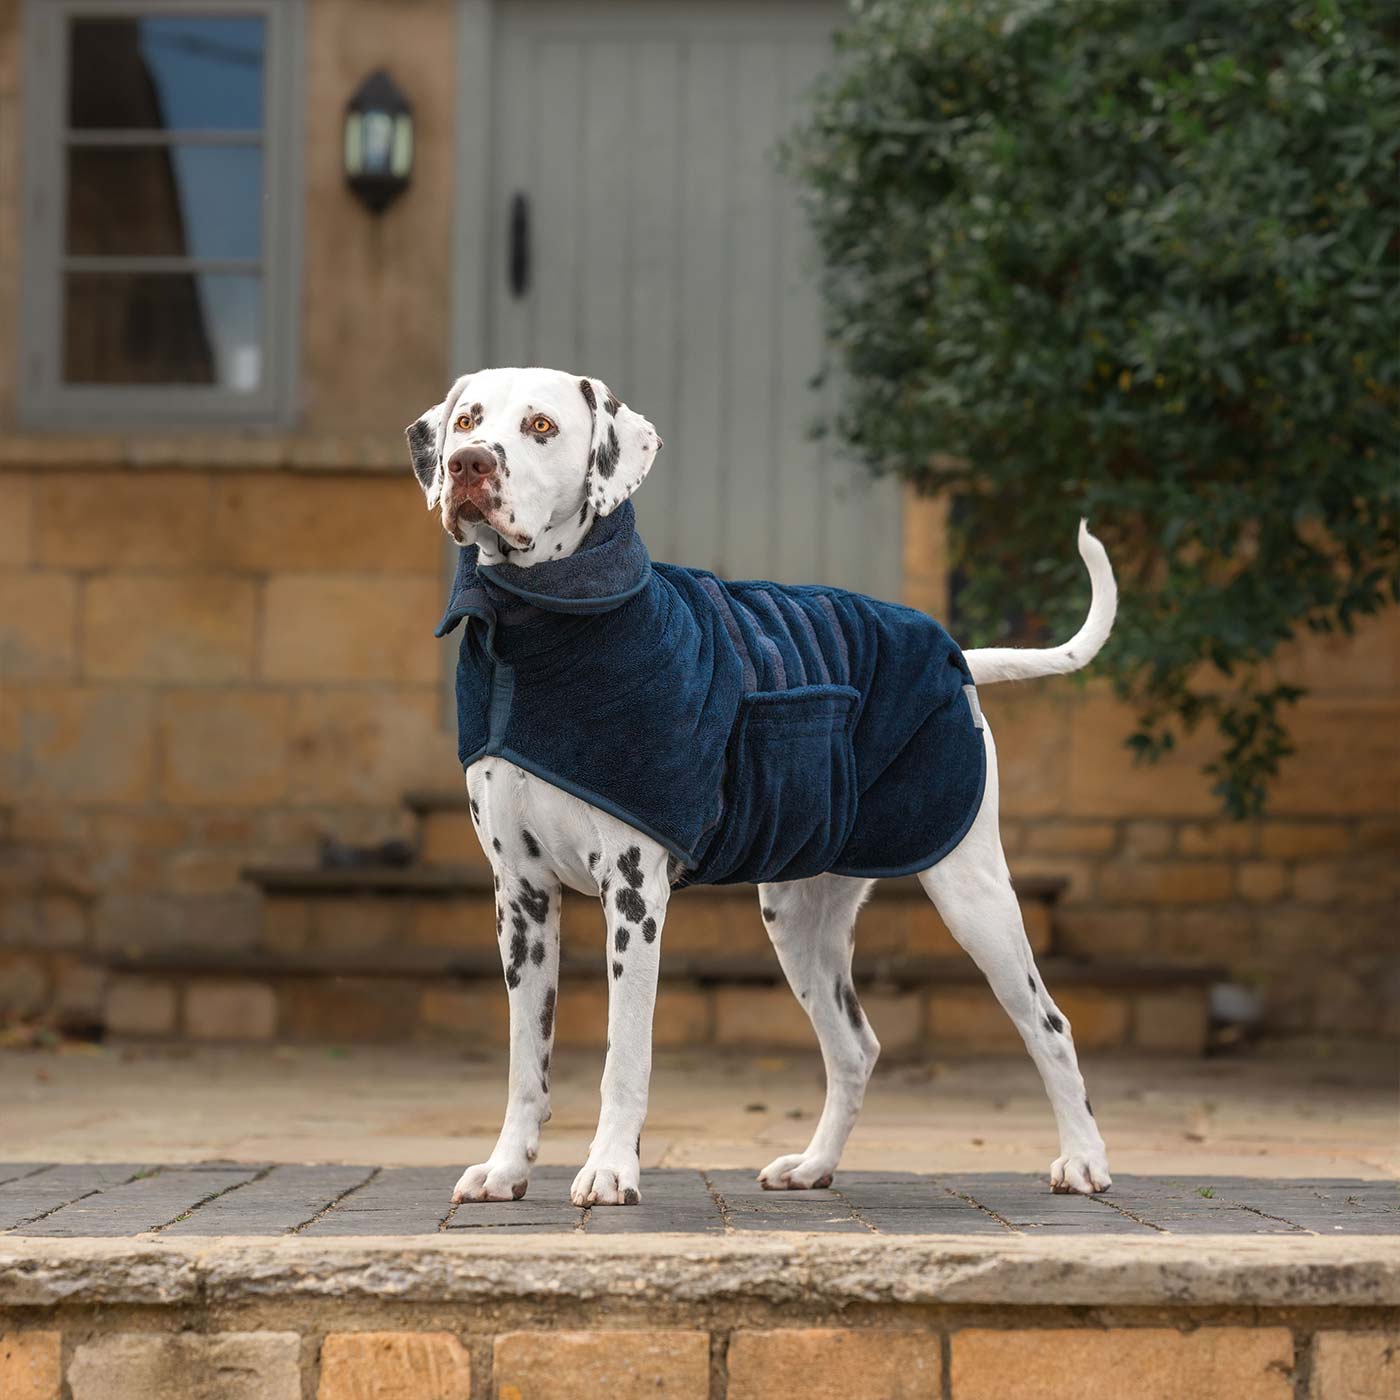 Discover the perfect dog drying with our bamboo dog drying coat in Navy The ideal choice for pet drying after walking and bath-time. Made using luxurious bamboo to aid sensitive skin! Available to personalize now at Lords & Labradors US, in 5 sizes and 4 beautiful colors